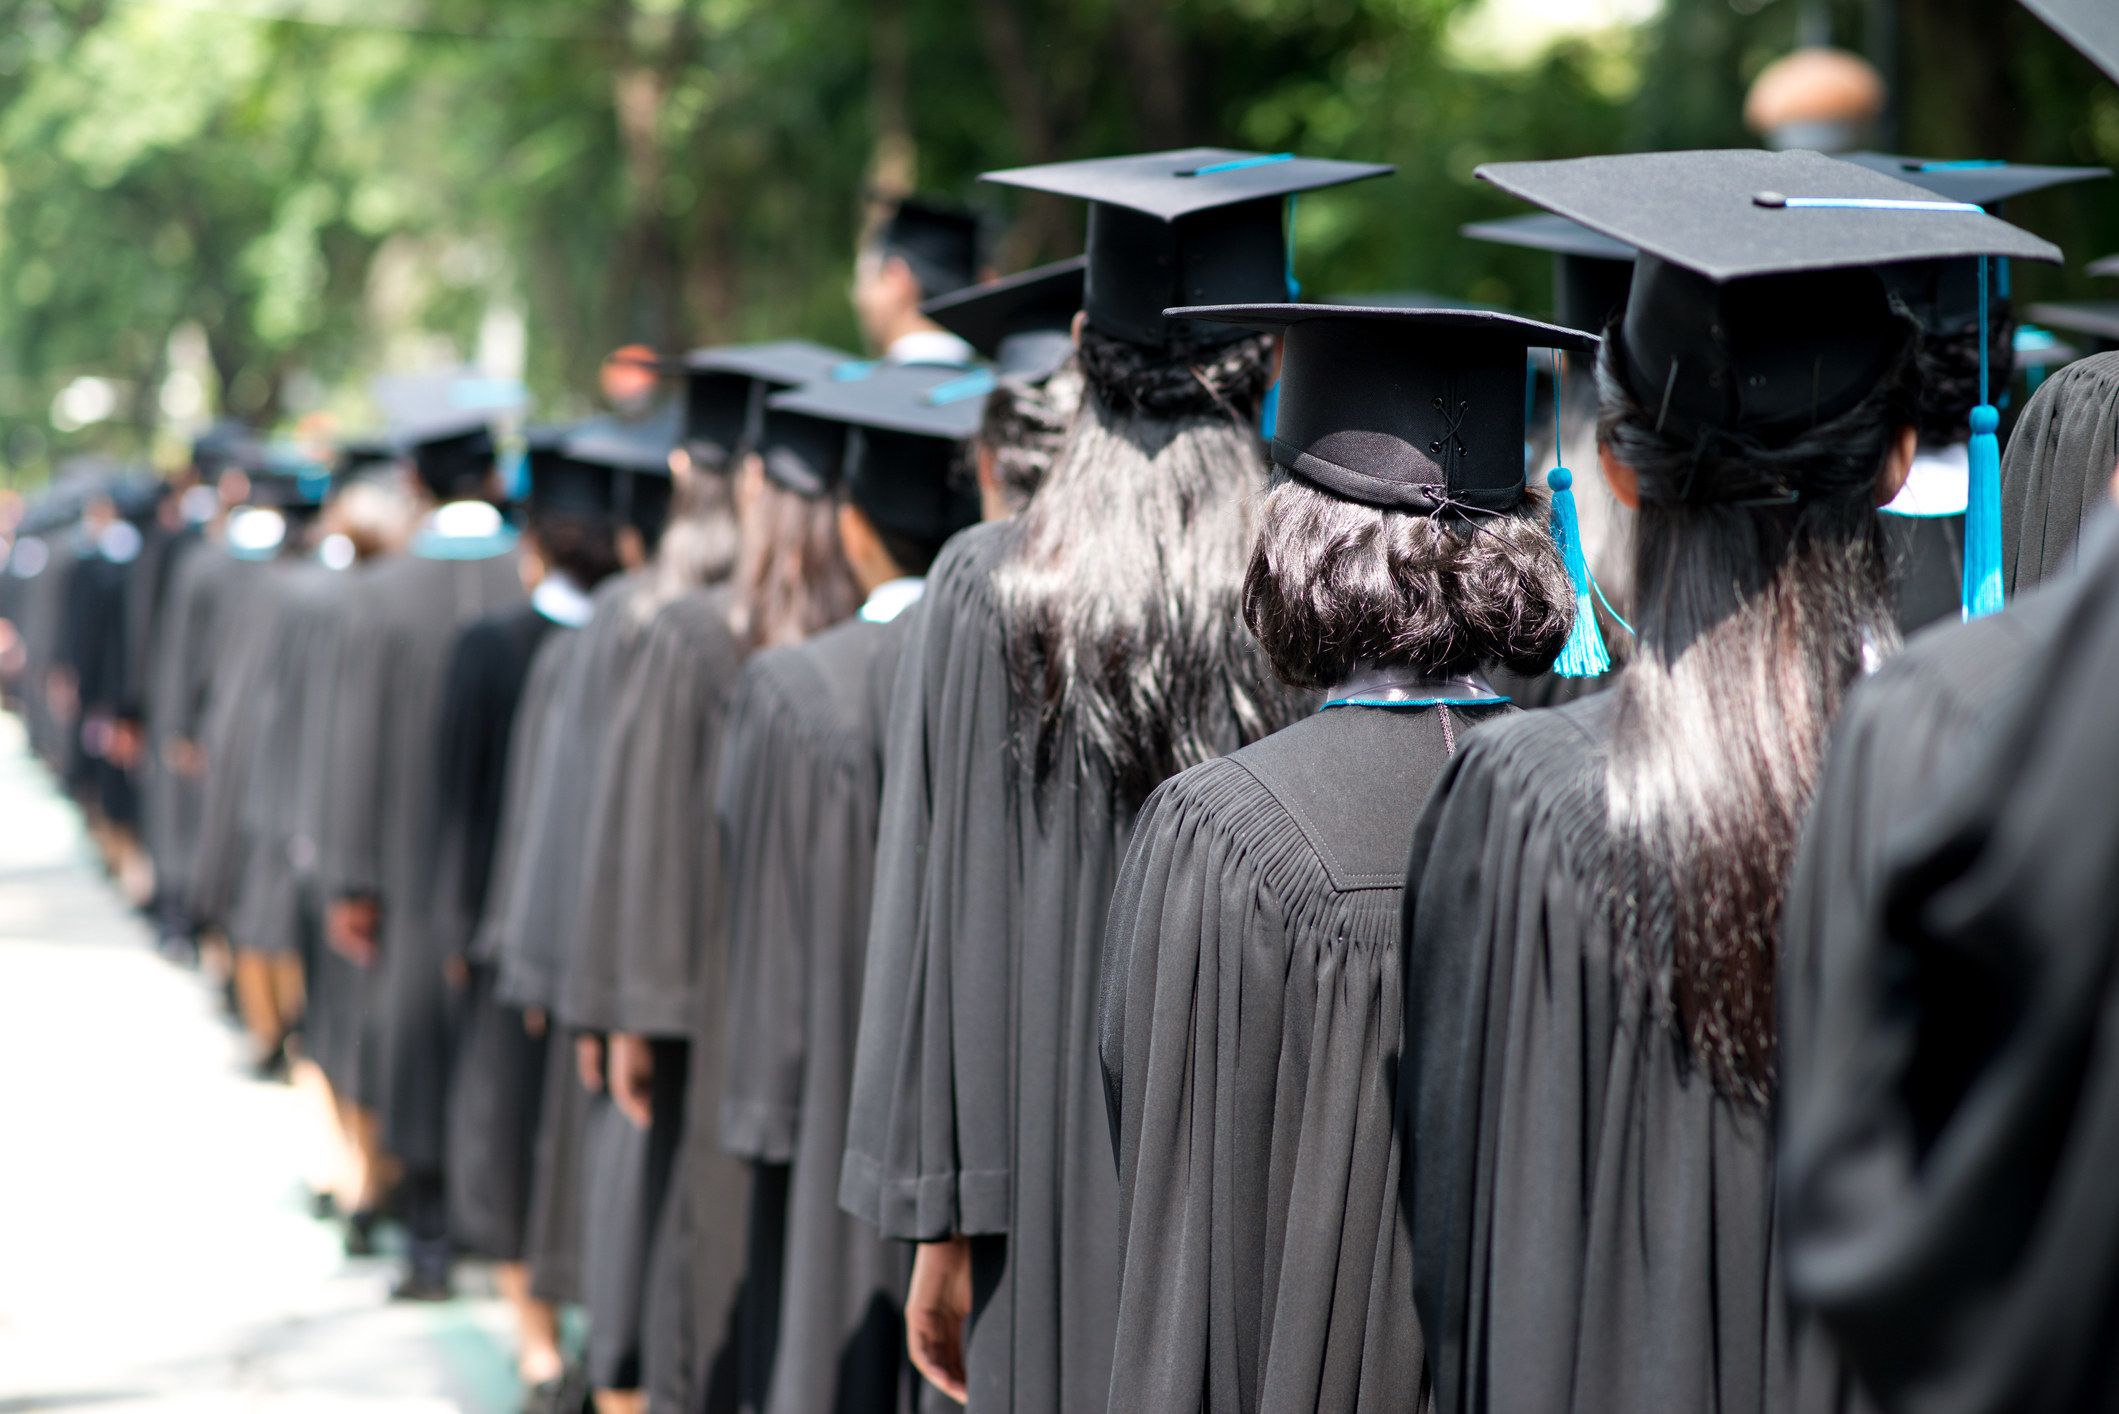 Graduates lined up at a commencement ceremony.